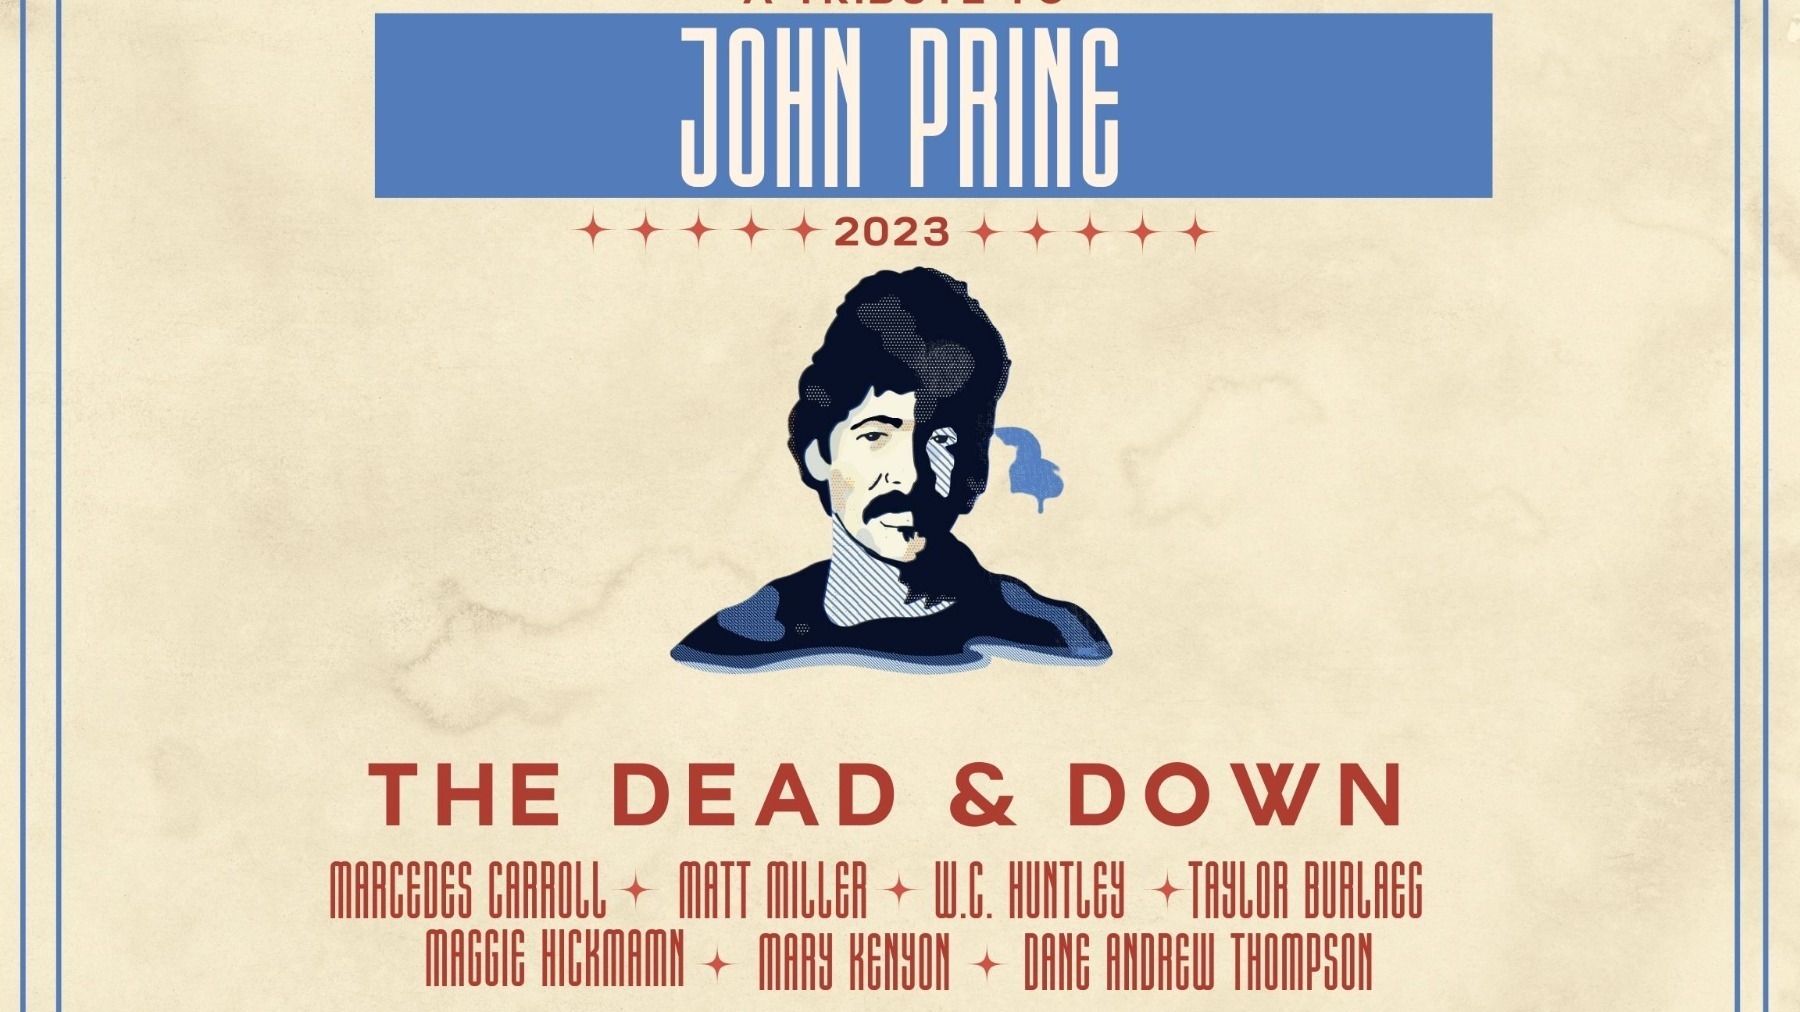 A Tribute to John Prine Featuring the Dead & Down